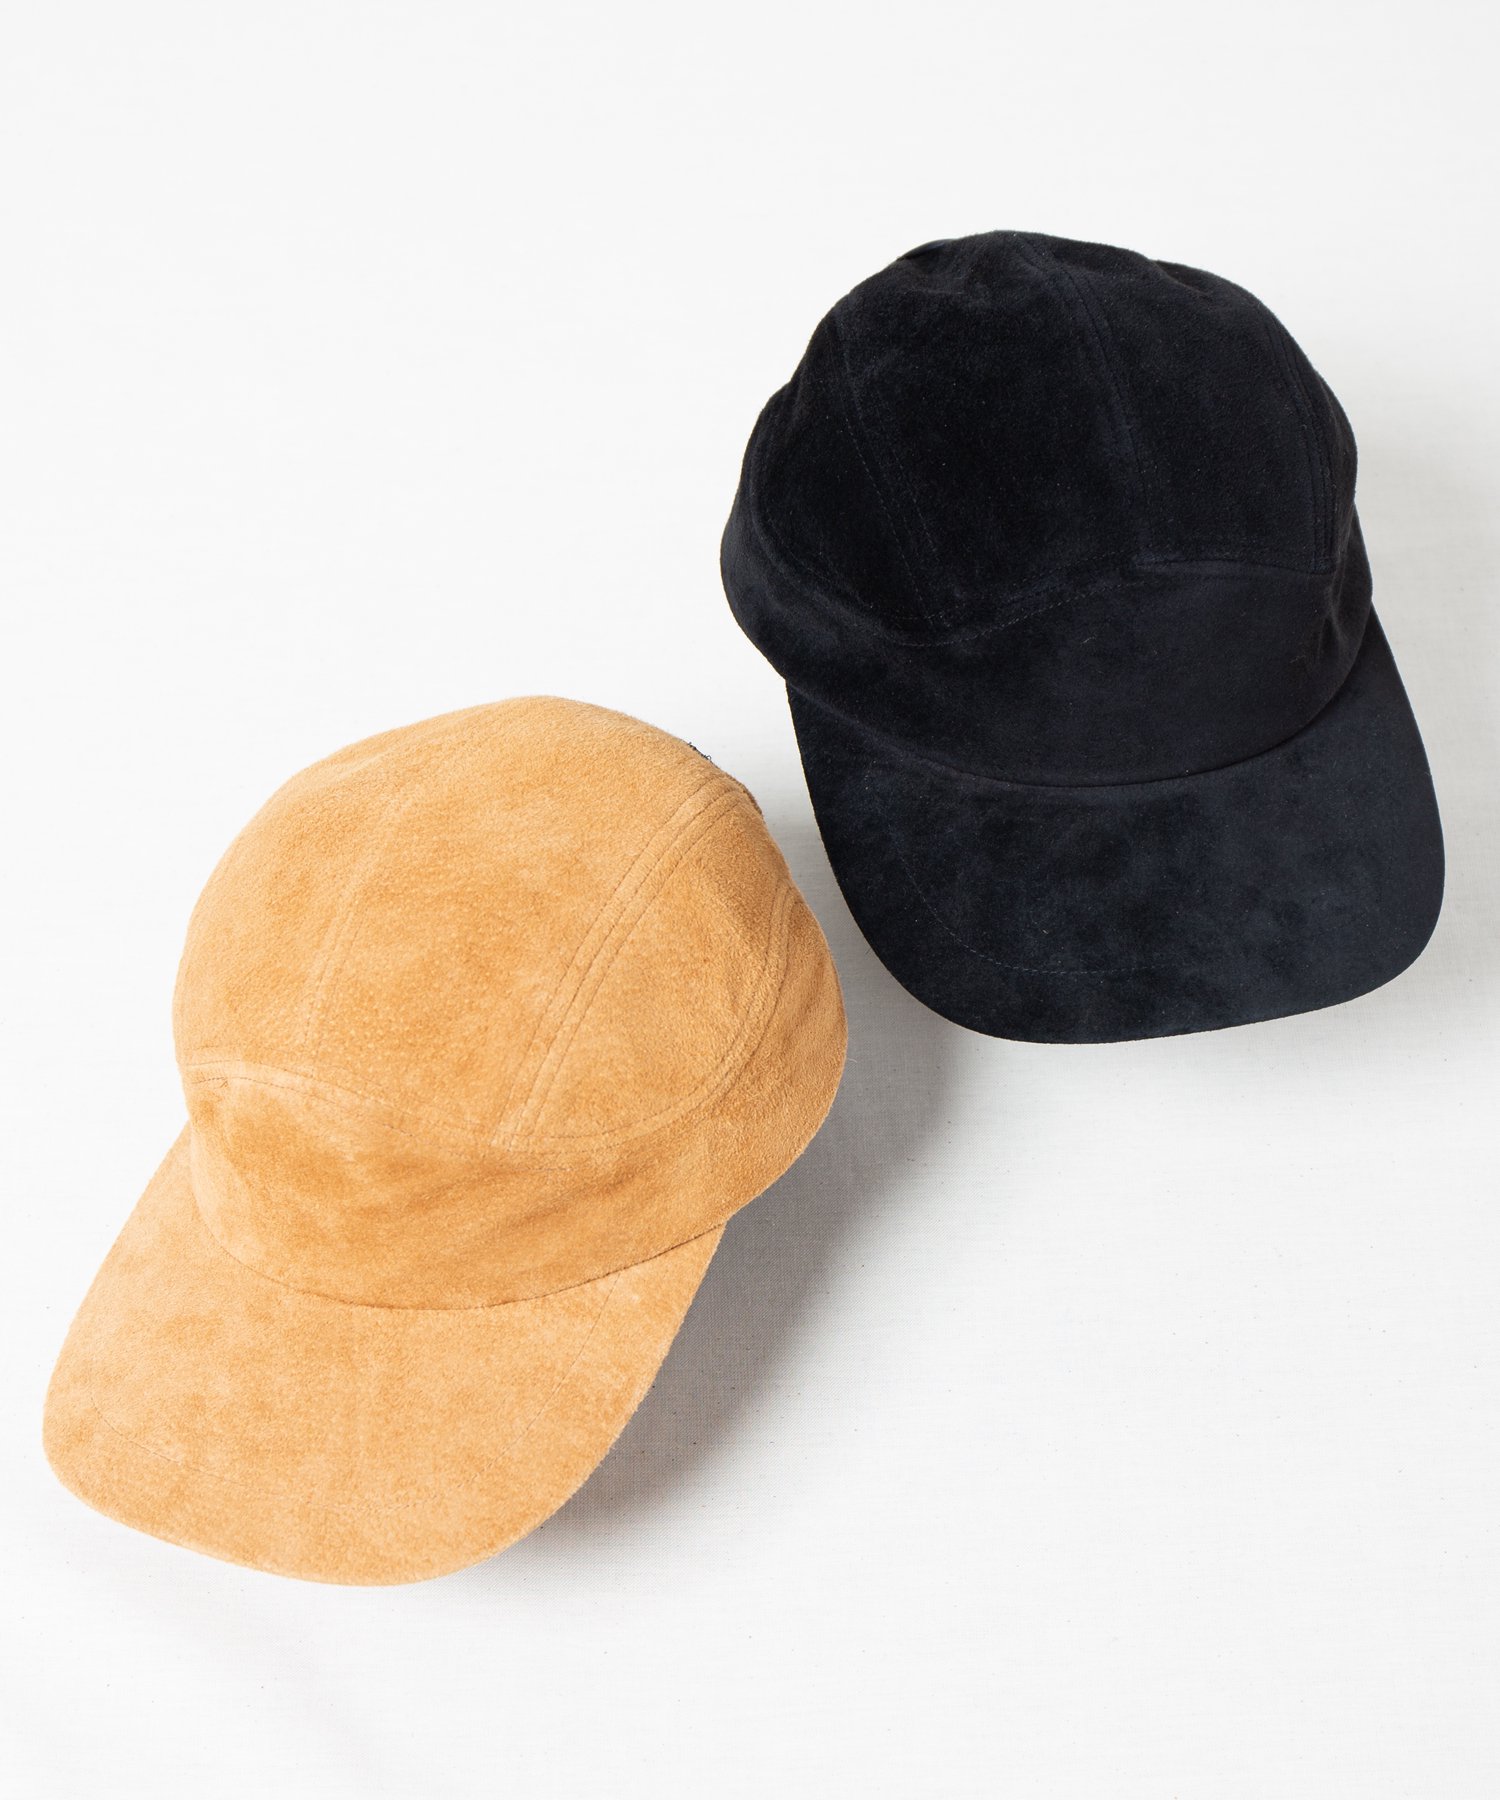 <img class='new_mark_img1' src='https://img.shop-pro.jp/img/new/icons20.gif' style='border:none;display:inline;margin:0px;padding:0px;width:auto;' />Indietro Association Leather Jet Cap 061 レザージェットキャップ